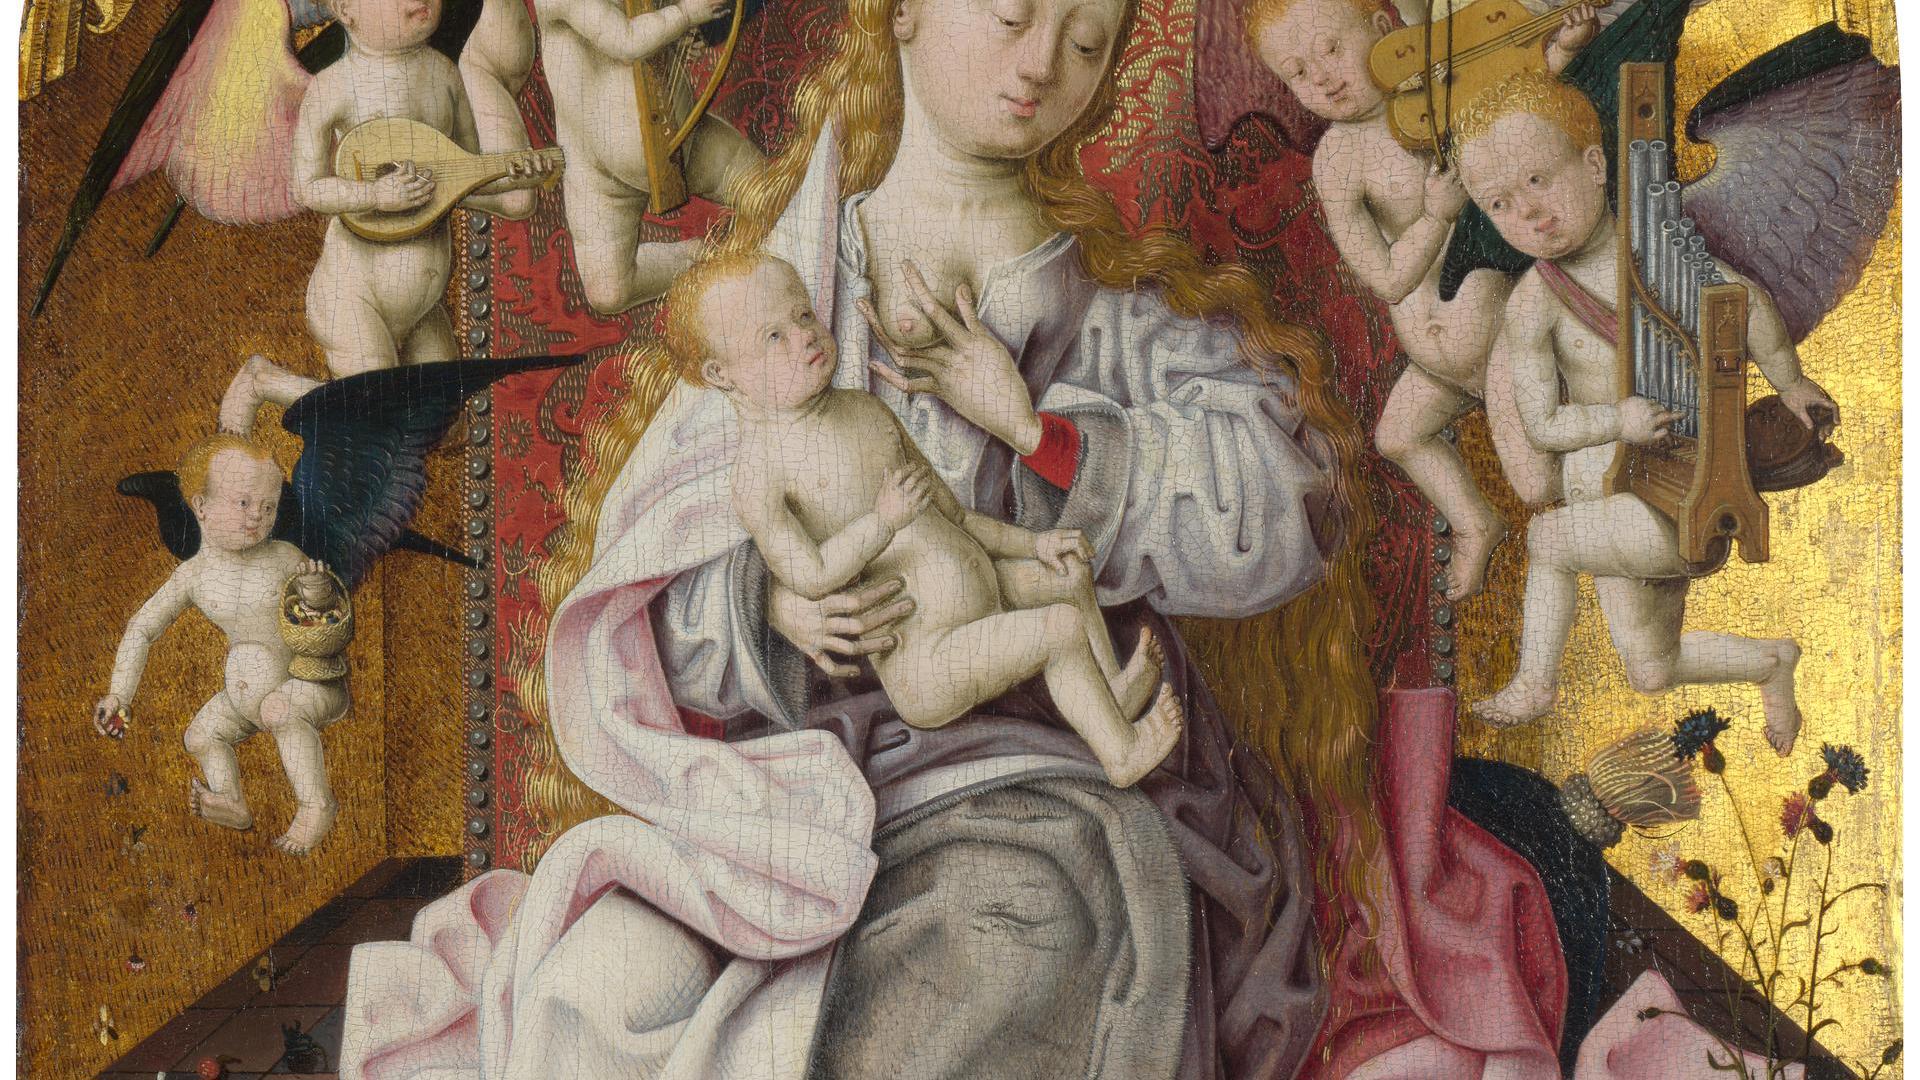 The Virgin and Child with Musical Angels by Master of the Saint Bartholomew Altarpiece